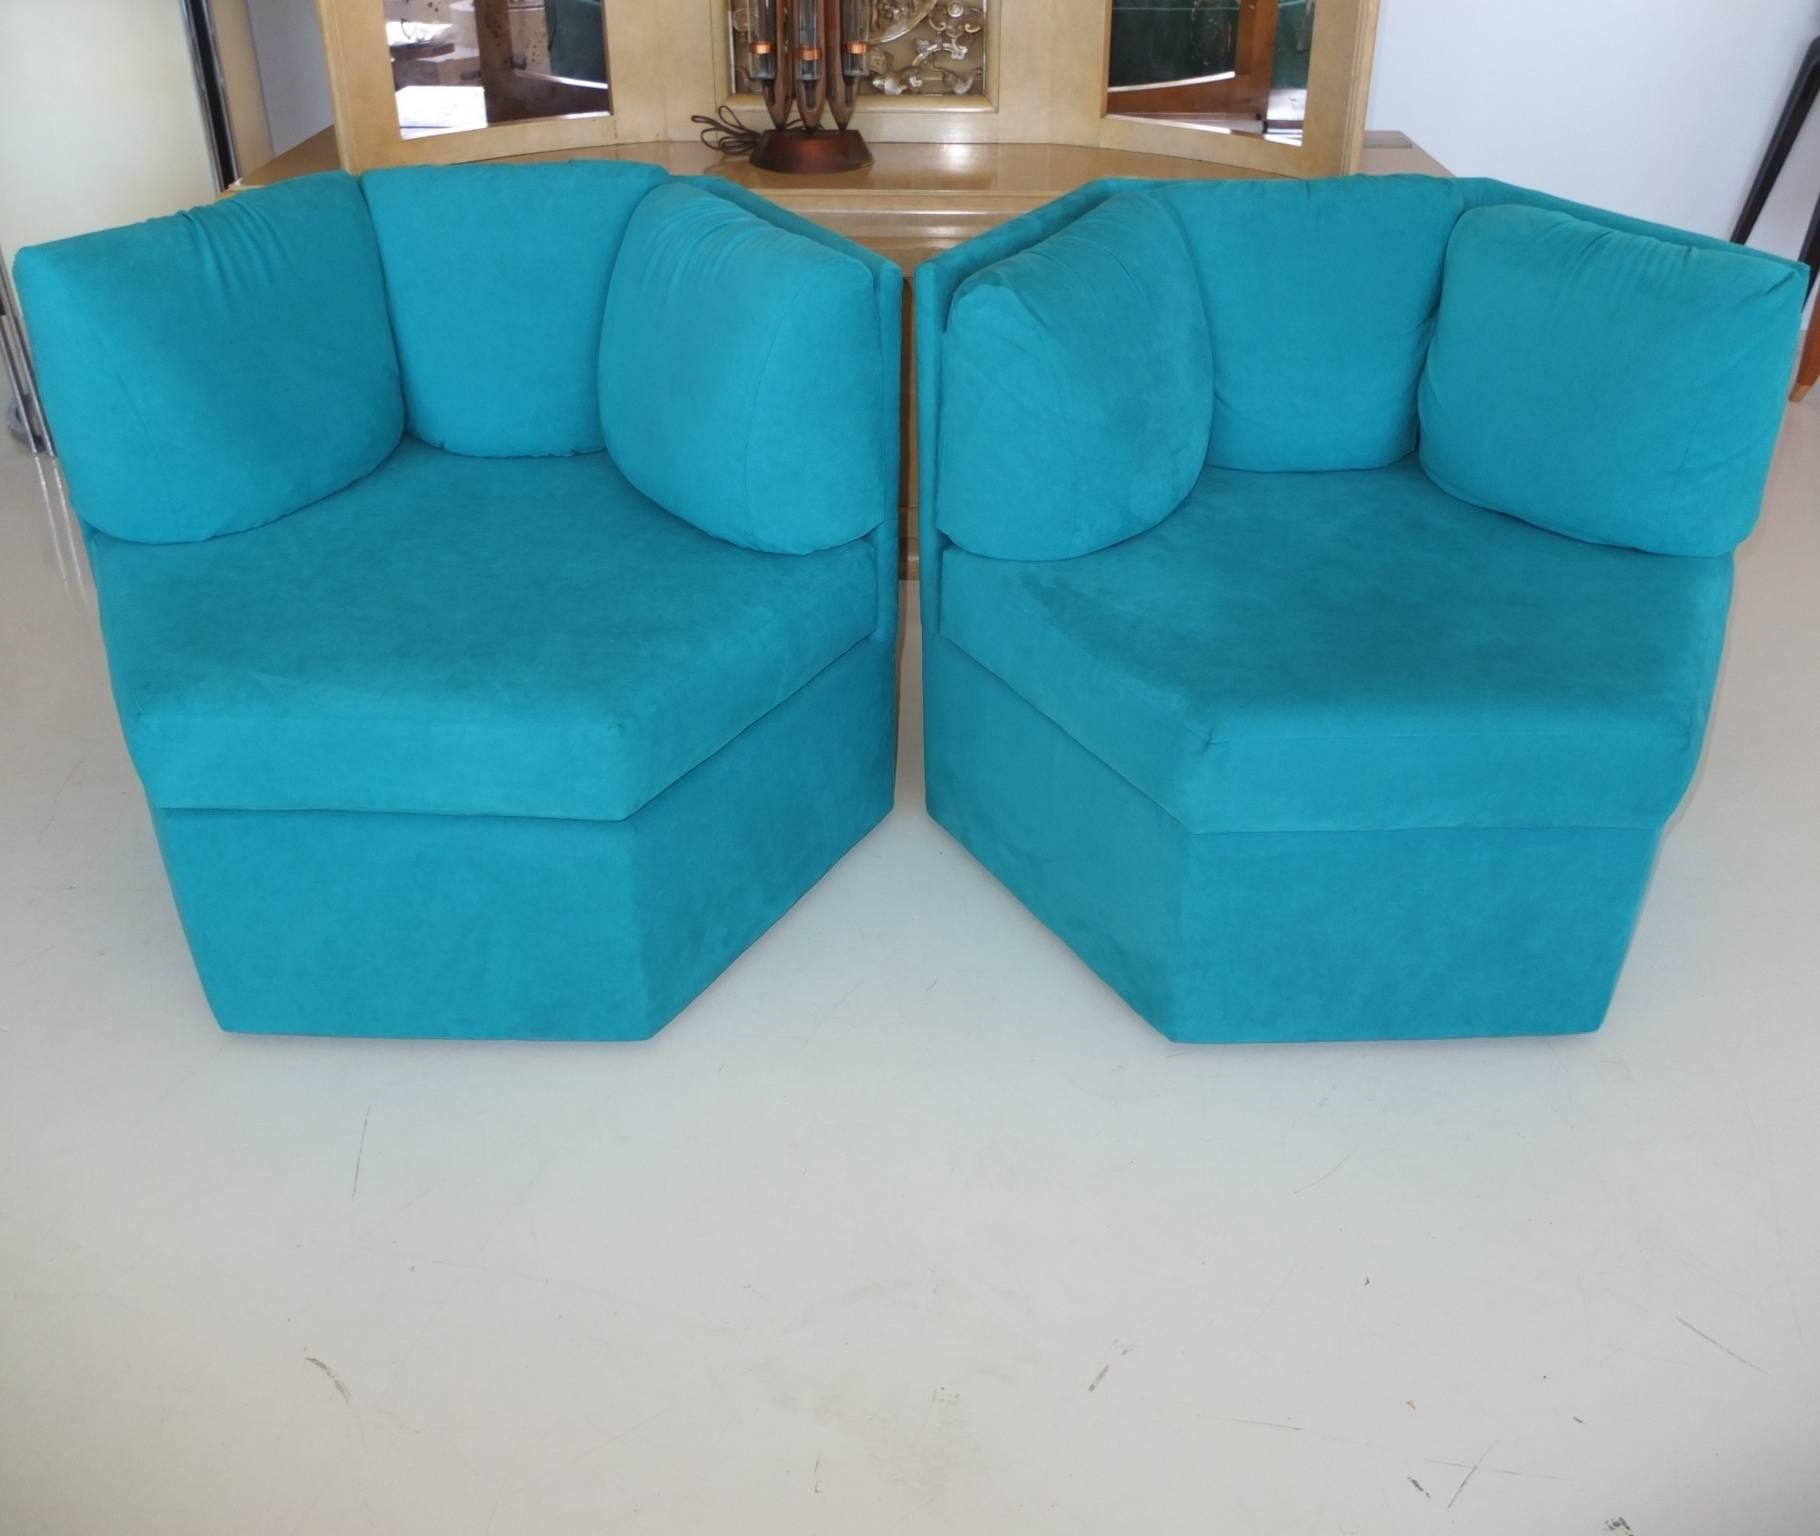 Three Hexagonal Swivel Club Chairs by Milo Baughman for Thayer Coggin In Good Condition For Sale In Hanover, MA